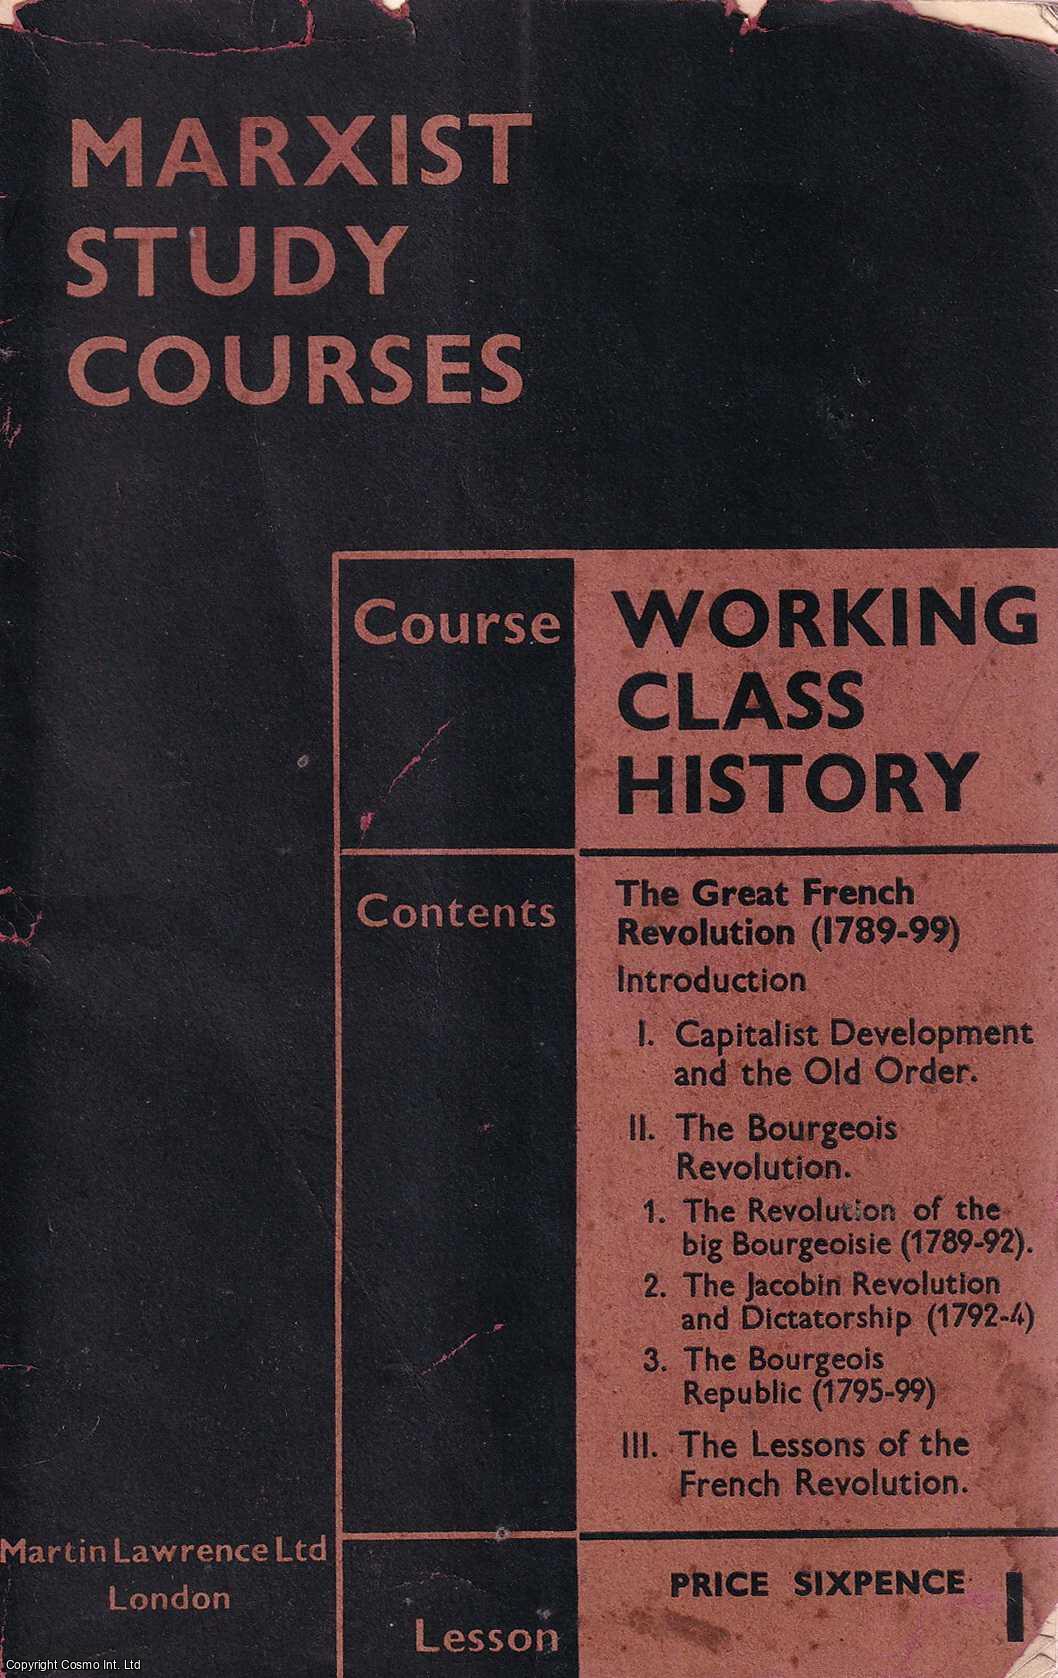 Marxist Study Courses - Working Class History: The Great French Revolution (1789-99). Marxist Study Courses No.2, Lesson 1.